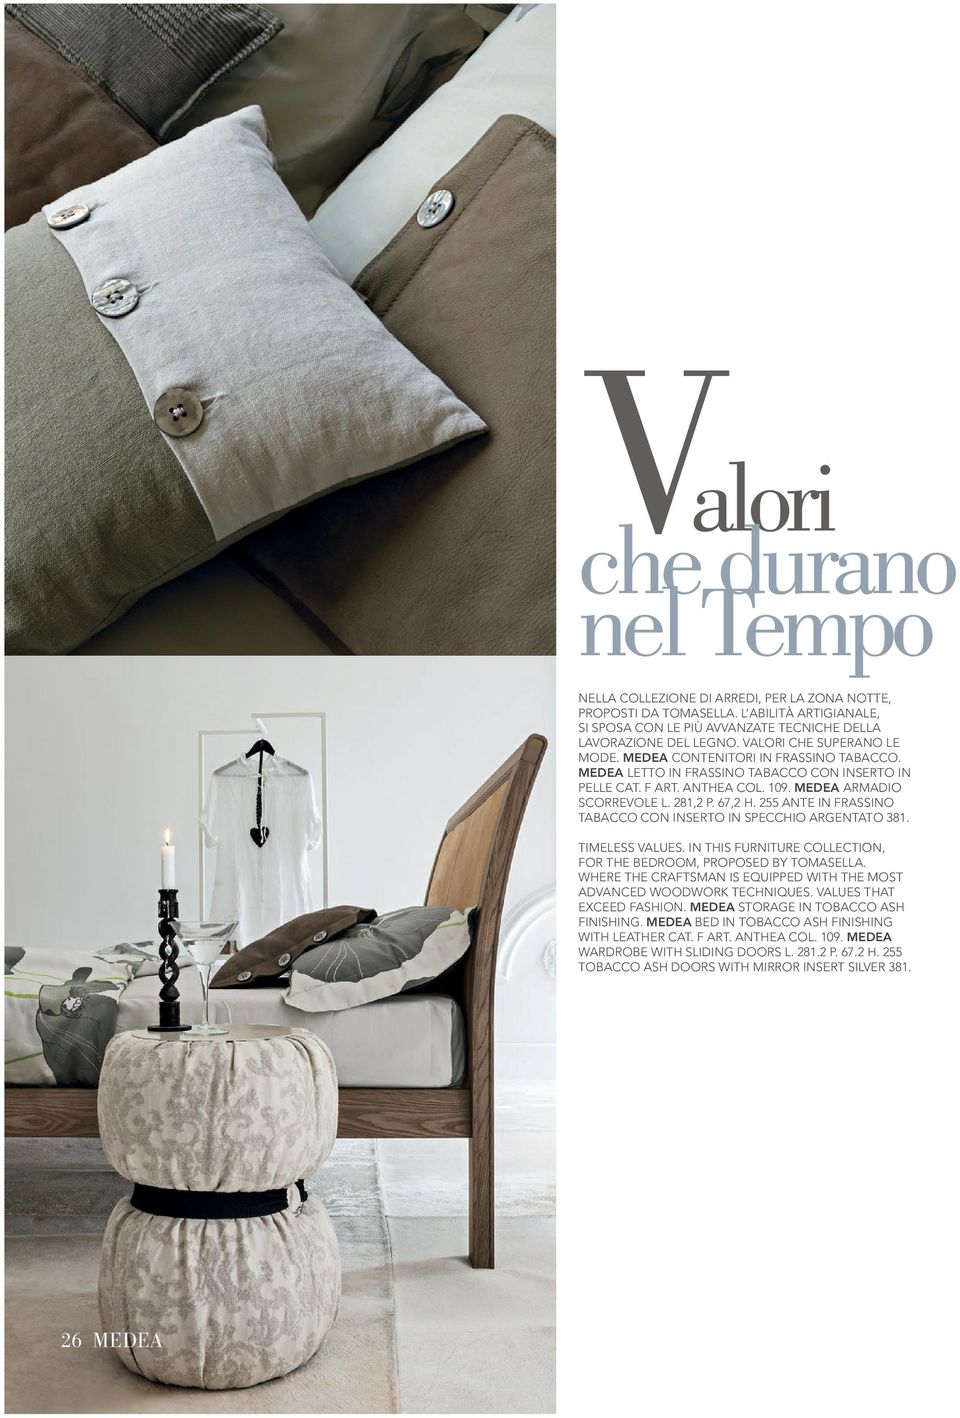 255 ANTE IN FRASSINO TABACCO CON INSERTO IN SPECCHIO ARGENTATO 381. TIMELESS VALUES. IN THIS FURNITURE COLLECTION, FOR THE BEDROOM, PROPOSED BY TOMASELLA.